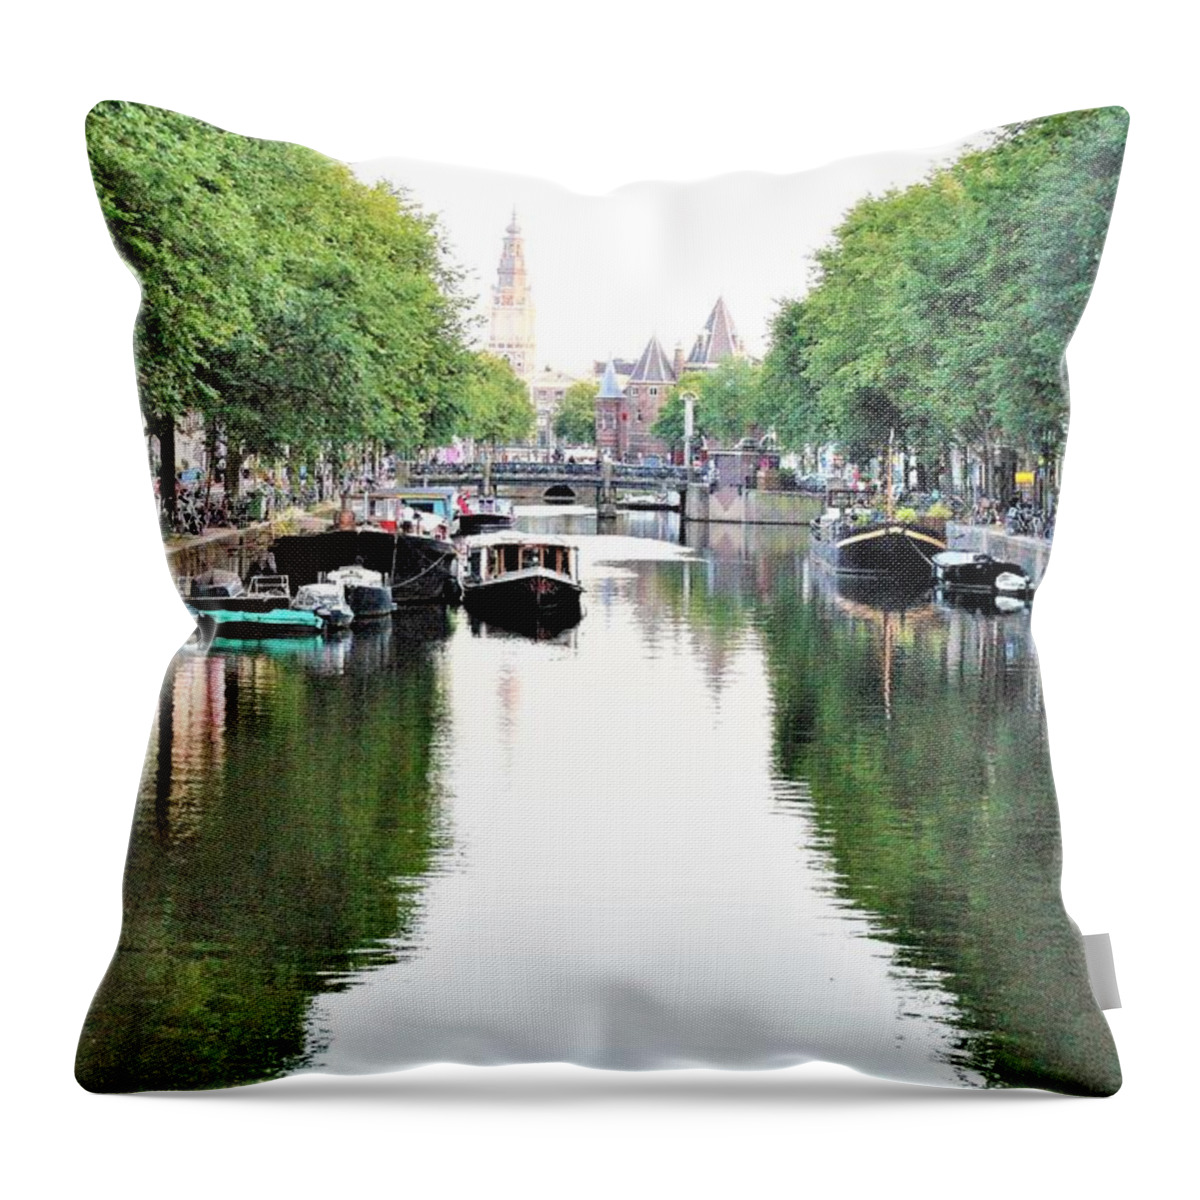 Amsterdam Canal Throw Pillow featuring the photograph Amsterdam by FD Graham